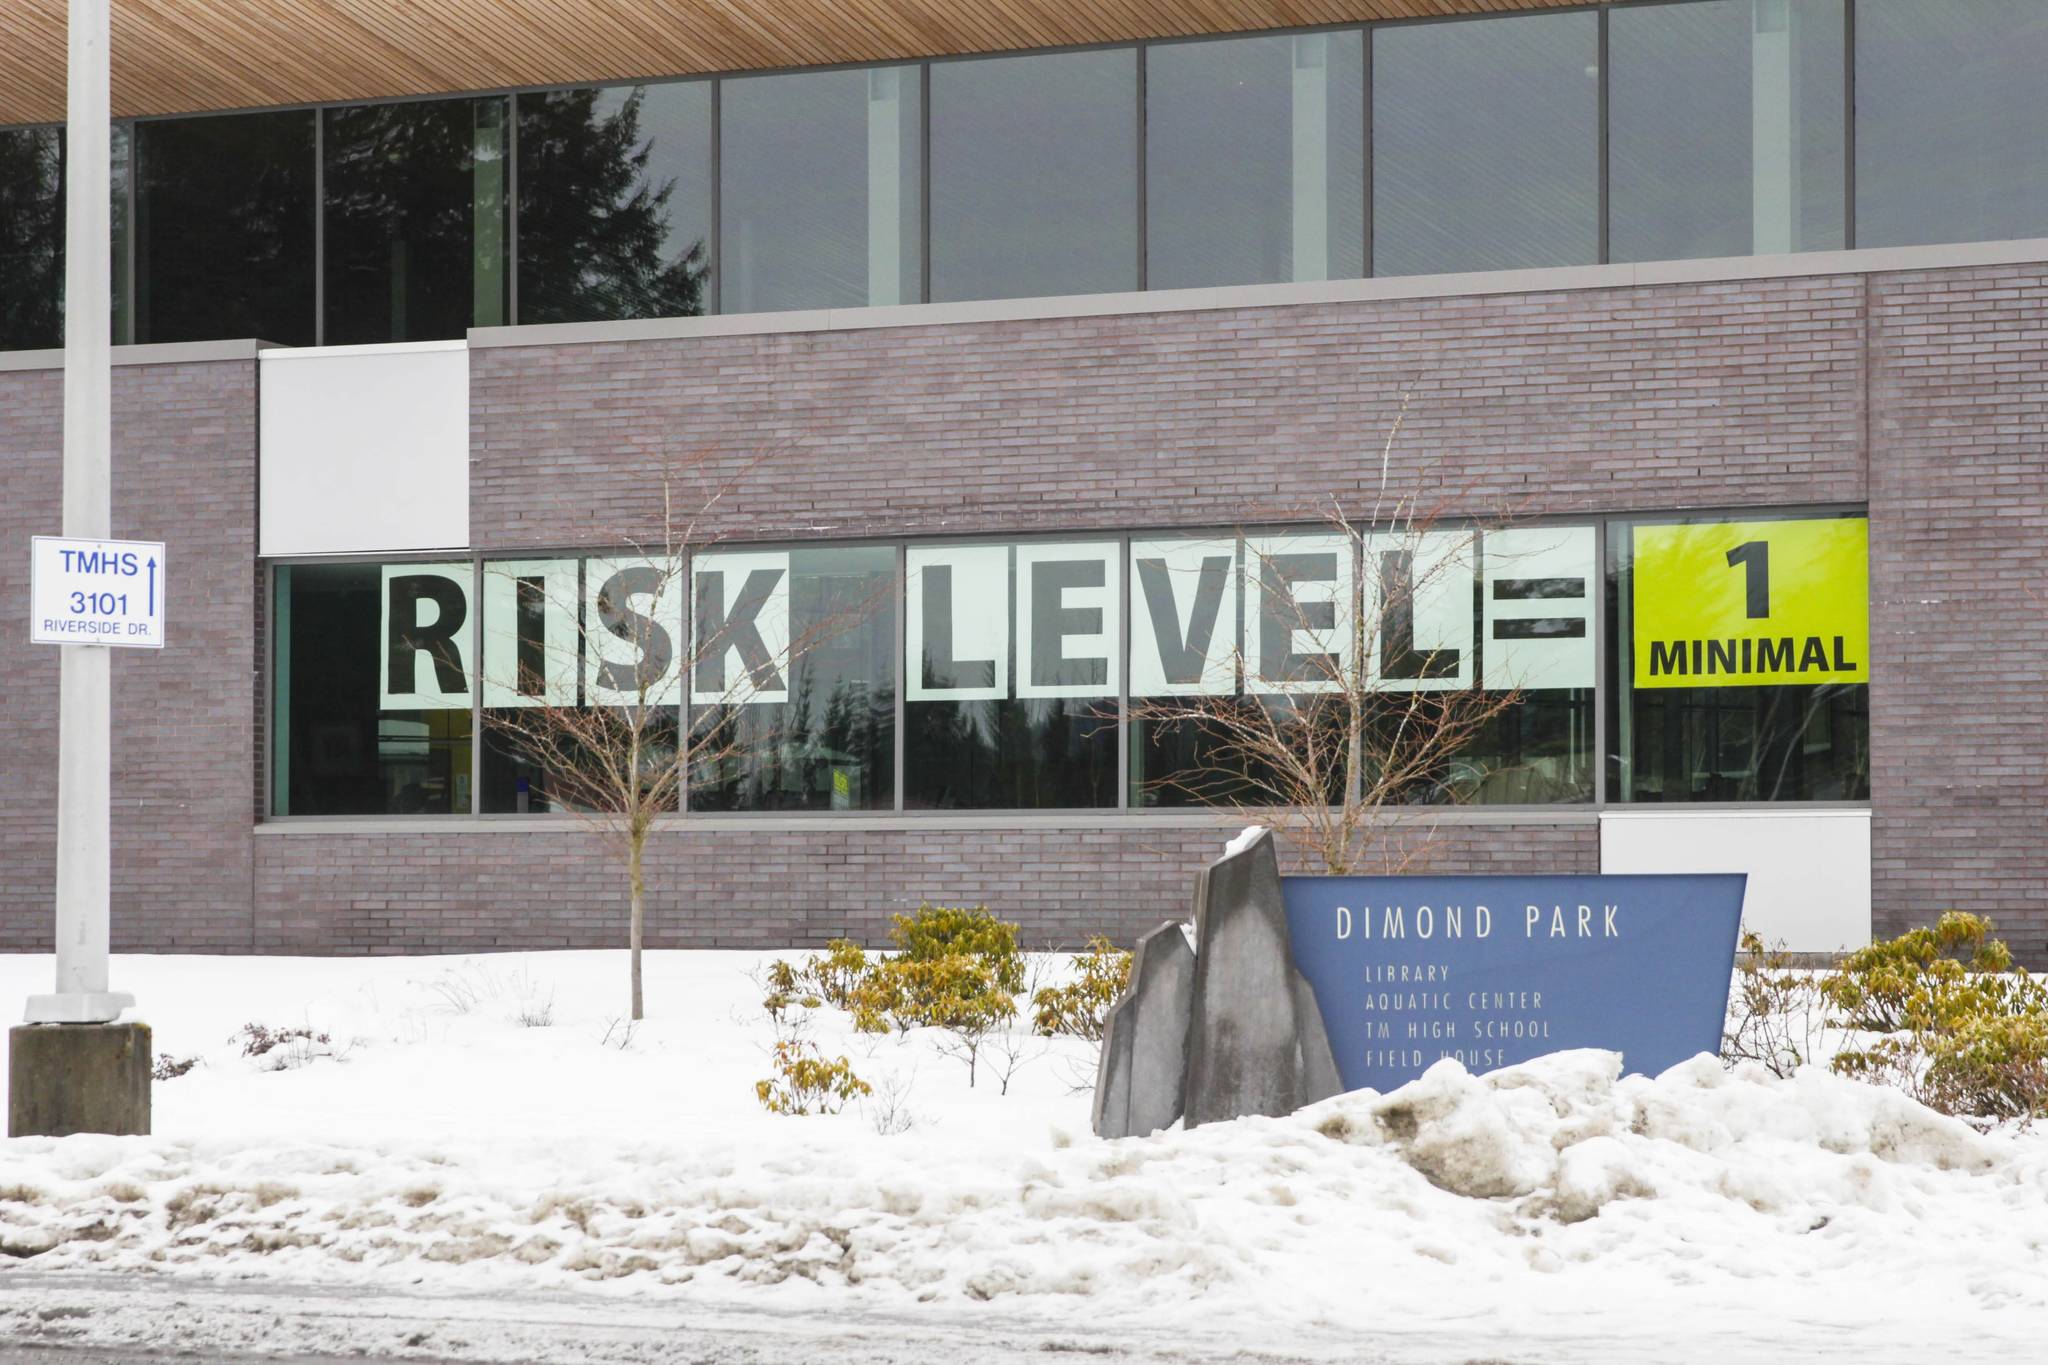 Juneau recently dropped its community risk level to Level 1. The change allows bars and gyms to become slightly more flexible in their operations. (Michael S. Lockett / Juneau Empire)